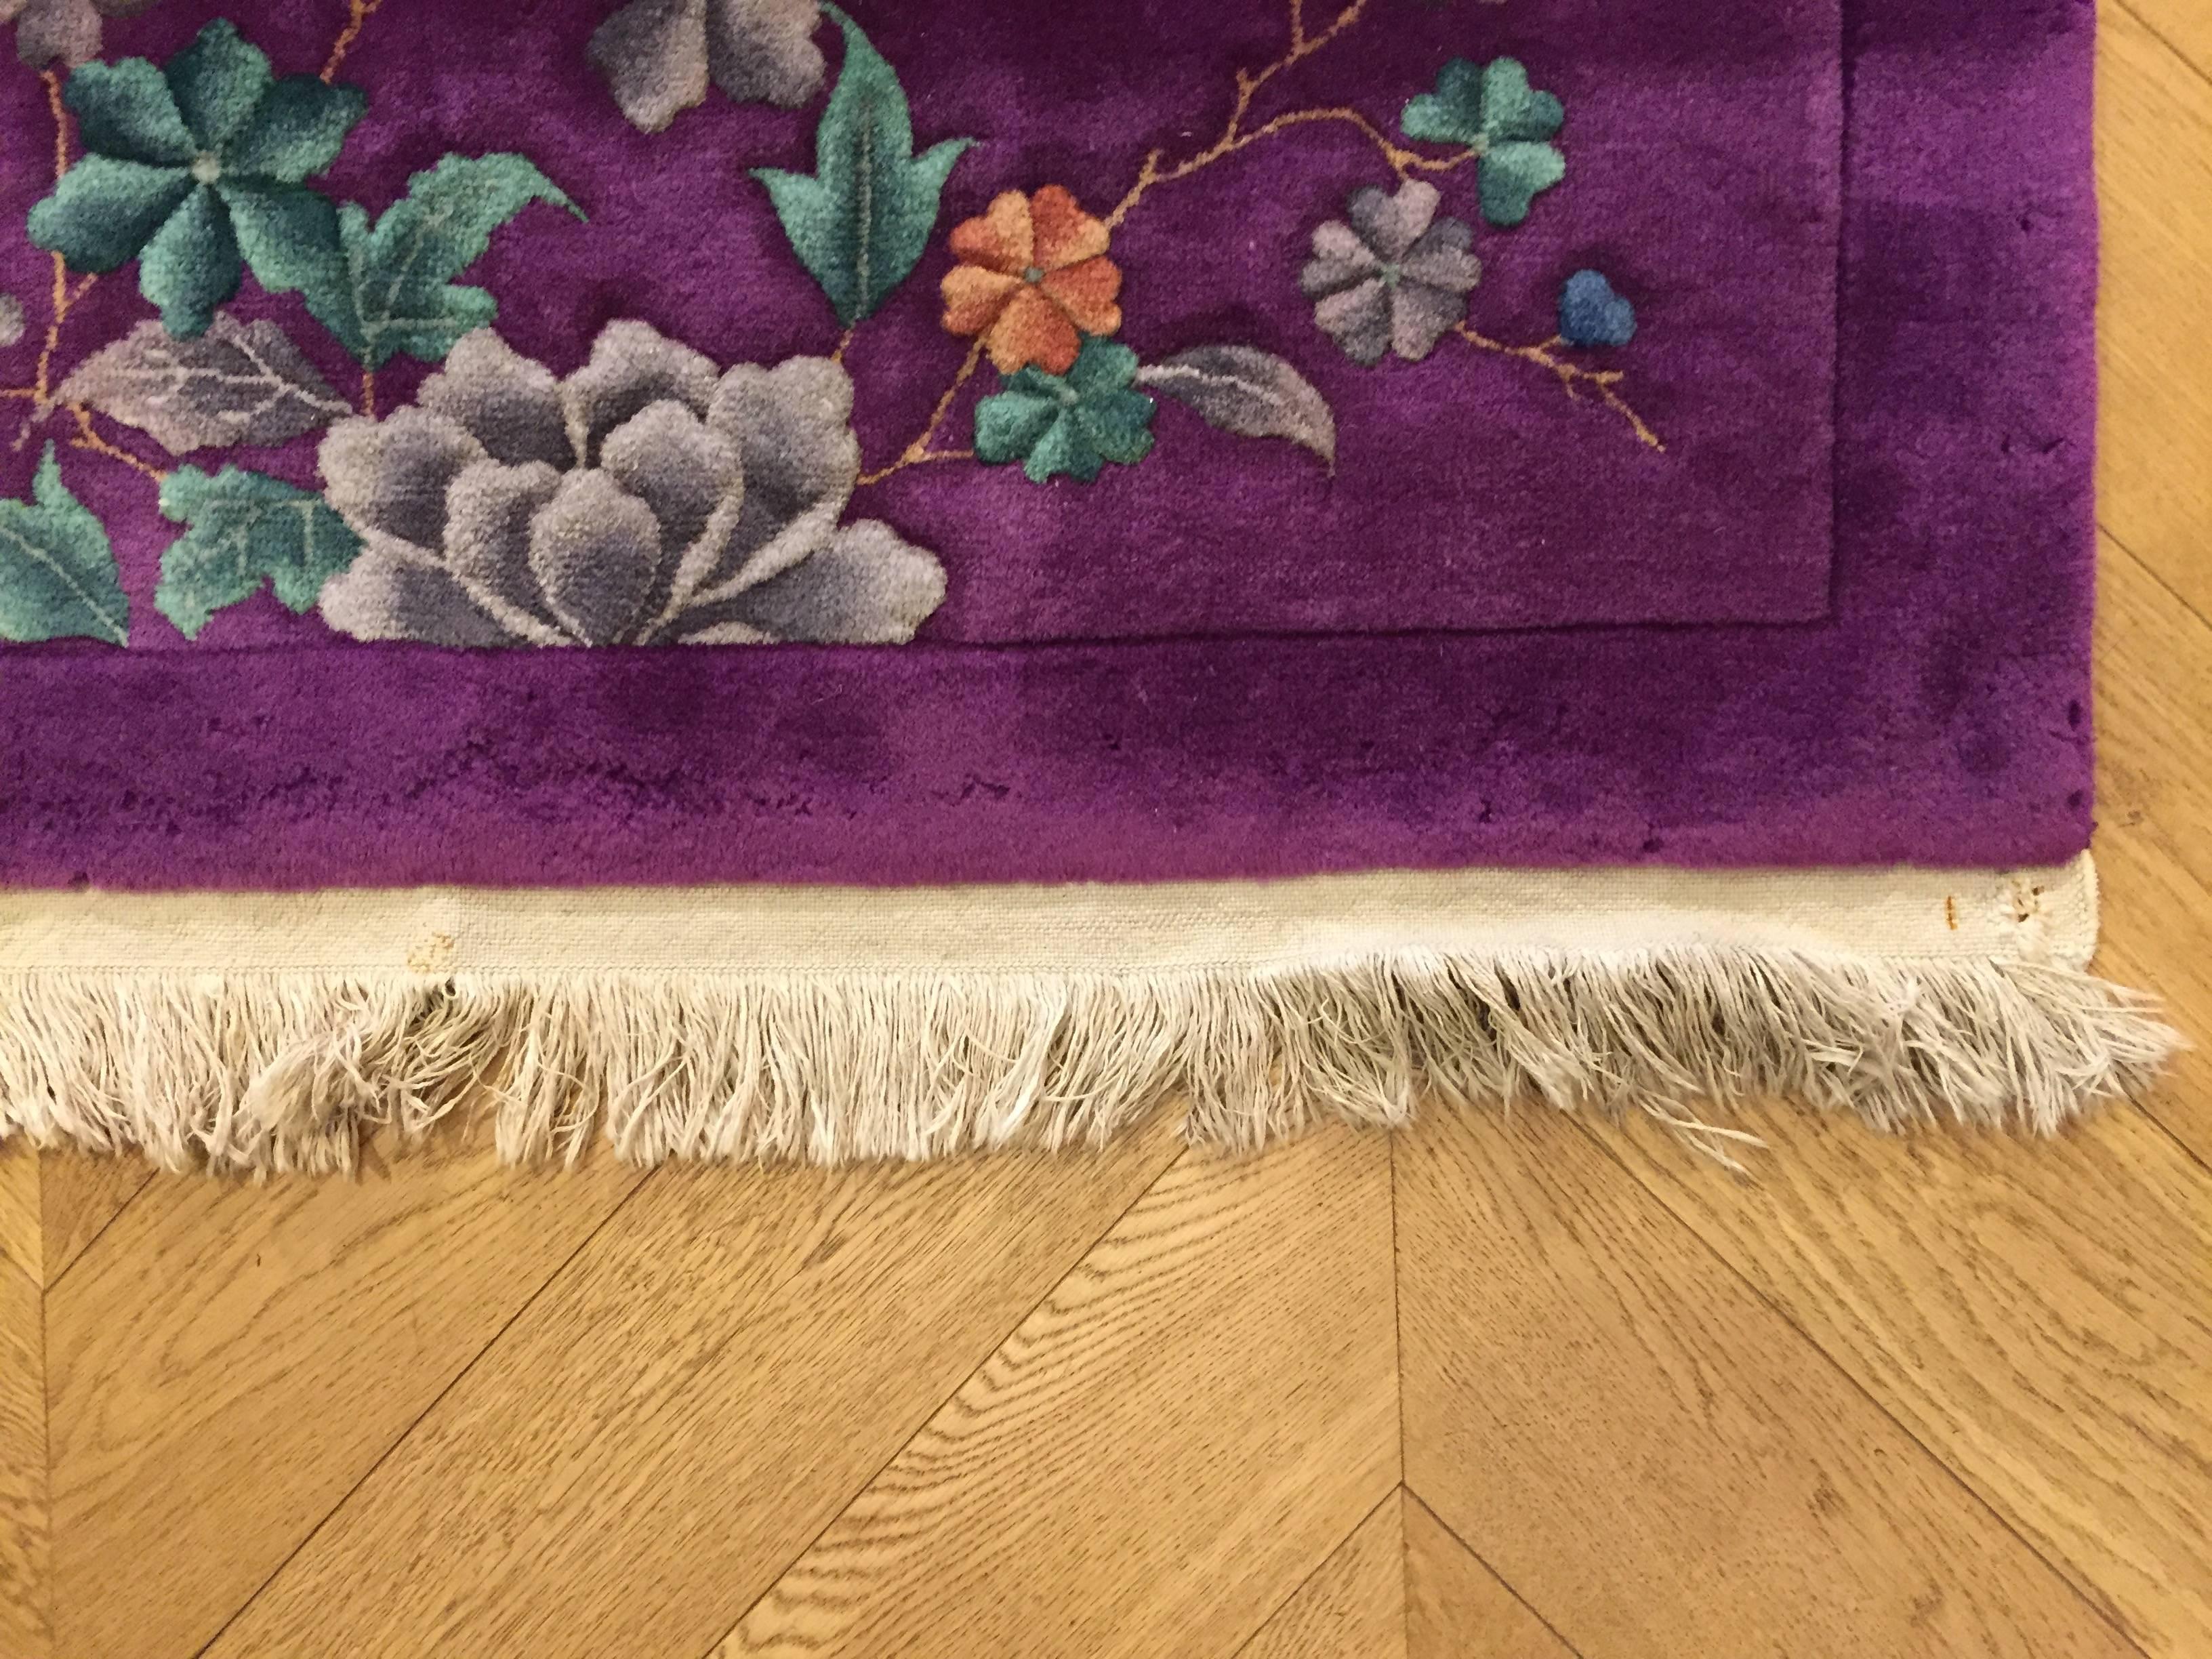 20th Century 1920-1940 Nichols Art Deco Chinese Rug Hand-Knotted Wool Violet 12